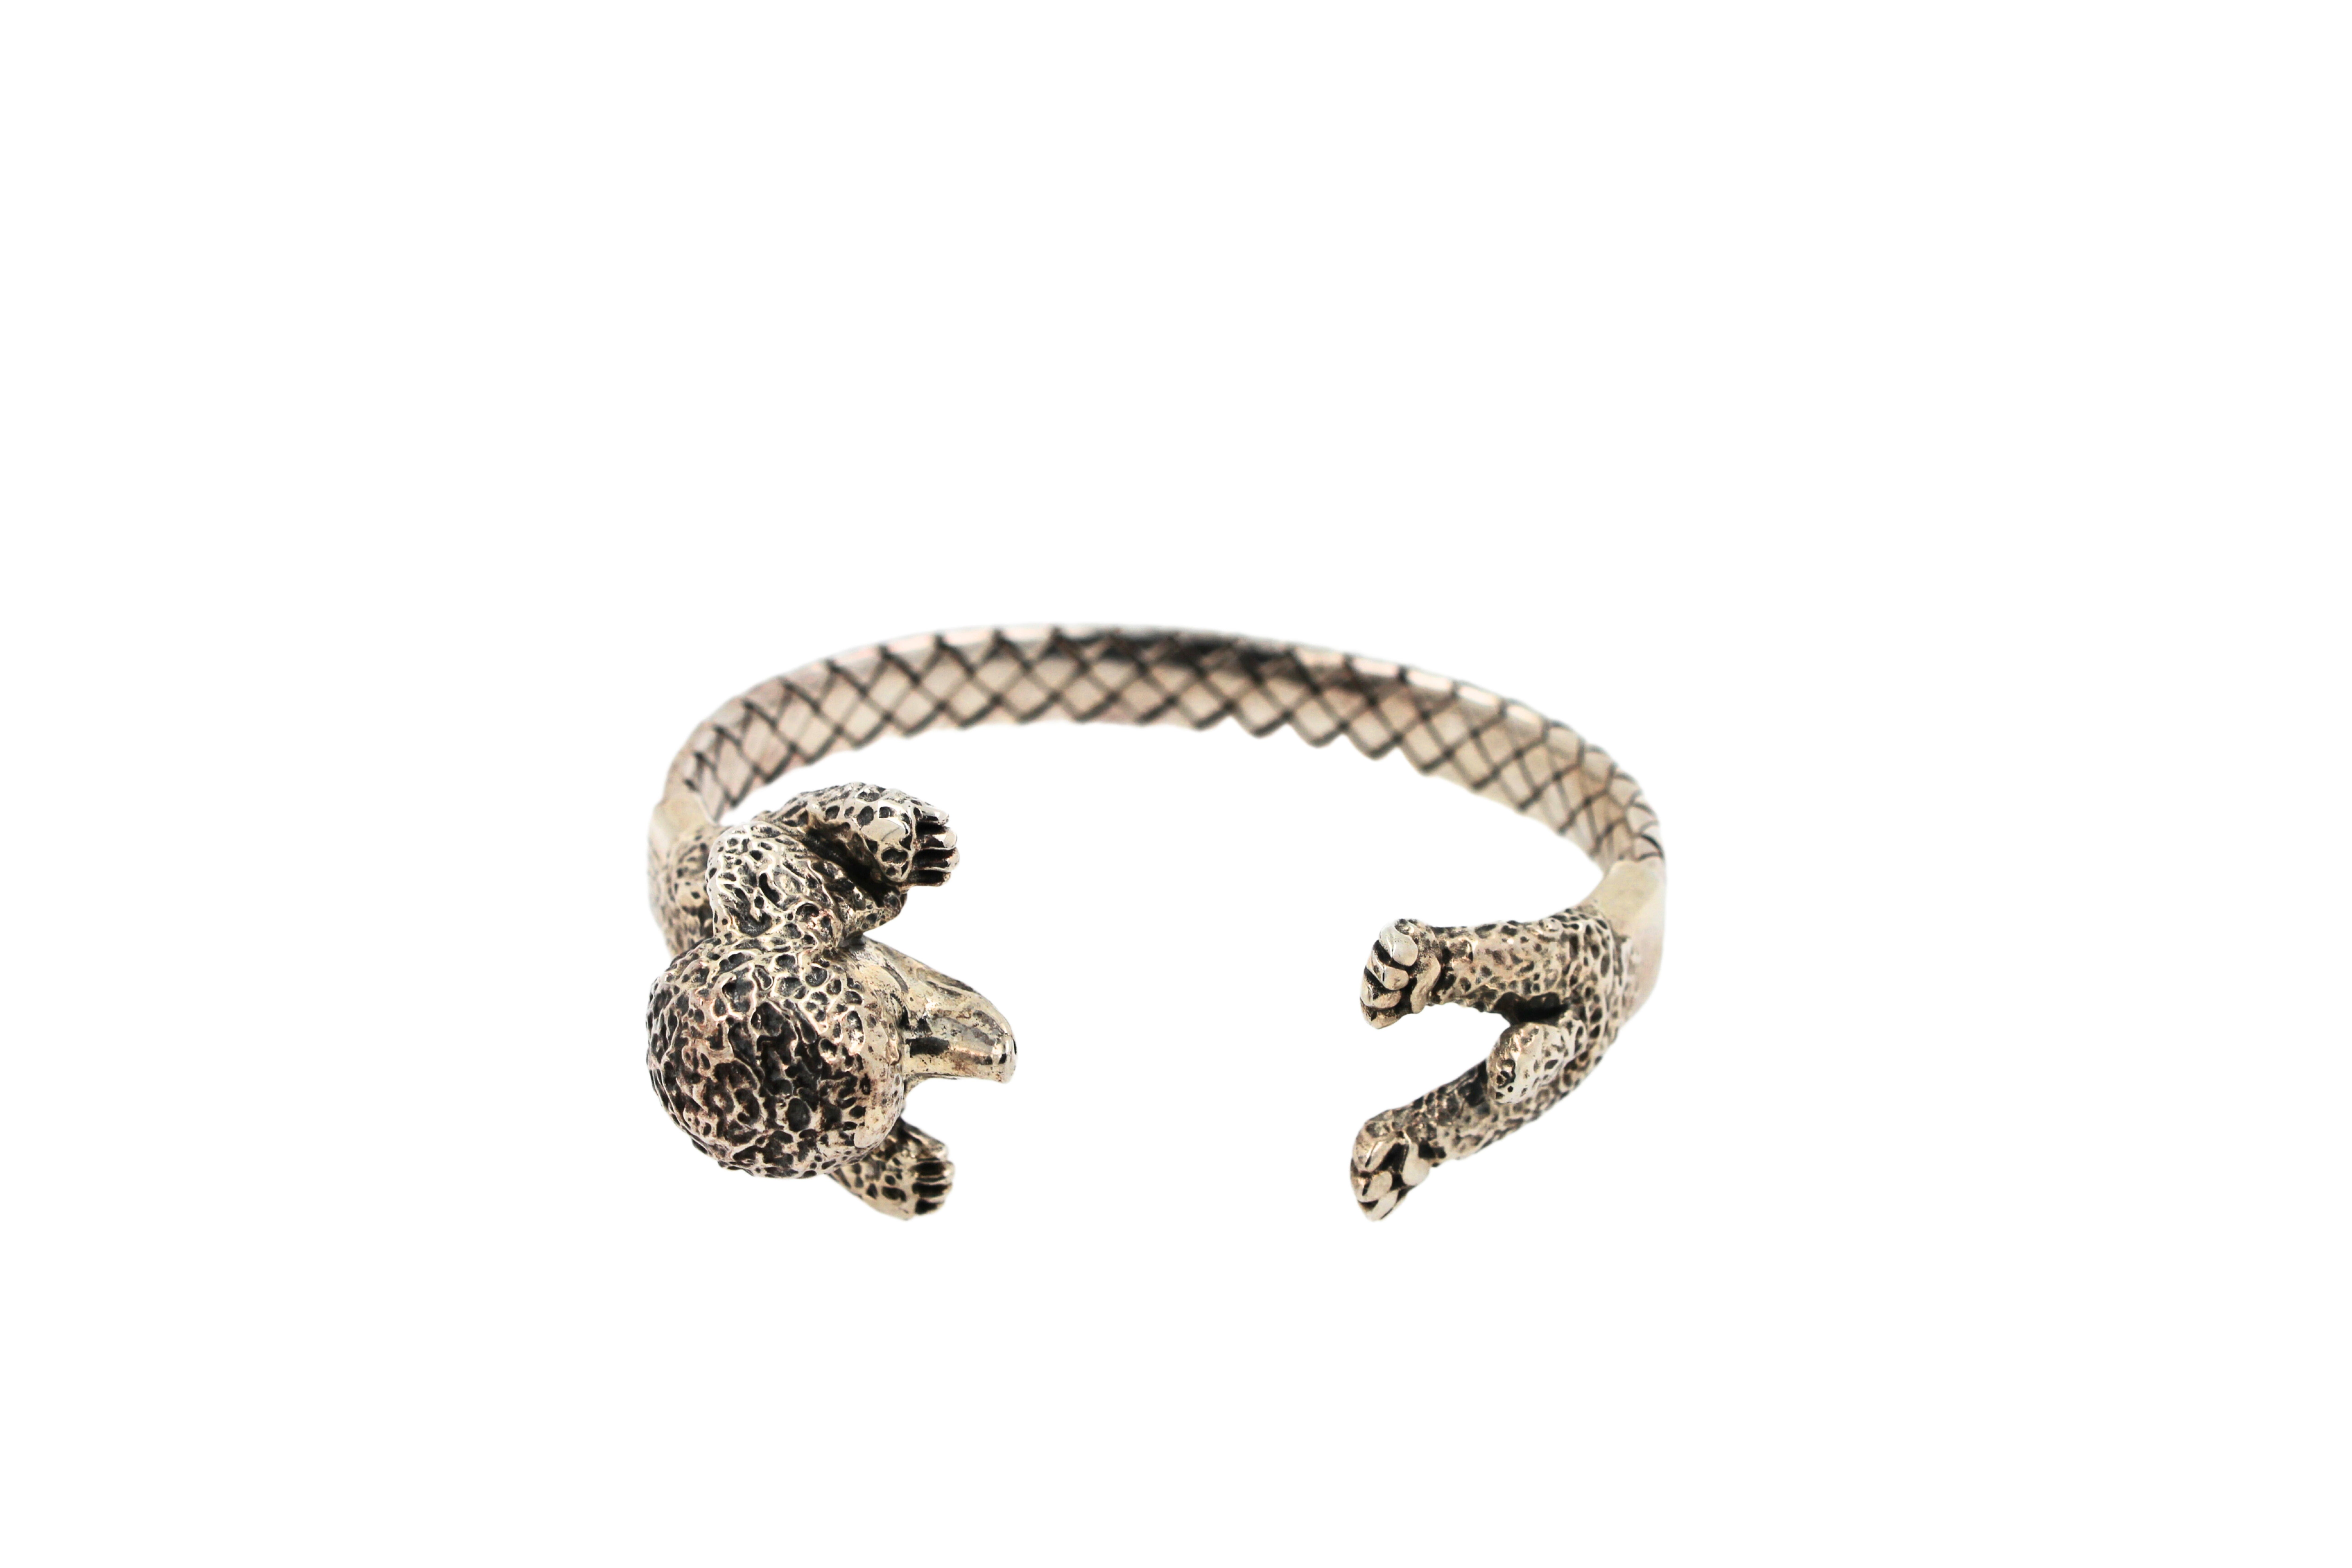 Dog Fever sterling silver designs faithfully portray the different dog puppy breeds in bangle cuff bracelet. Cute, fun and versatile
-925 Sterling Silver 
-Entirely designed and handcrafted in Italy
-Silver is slightly tarnished due to natural